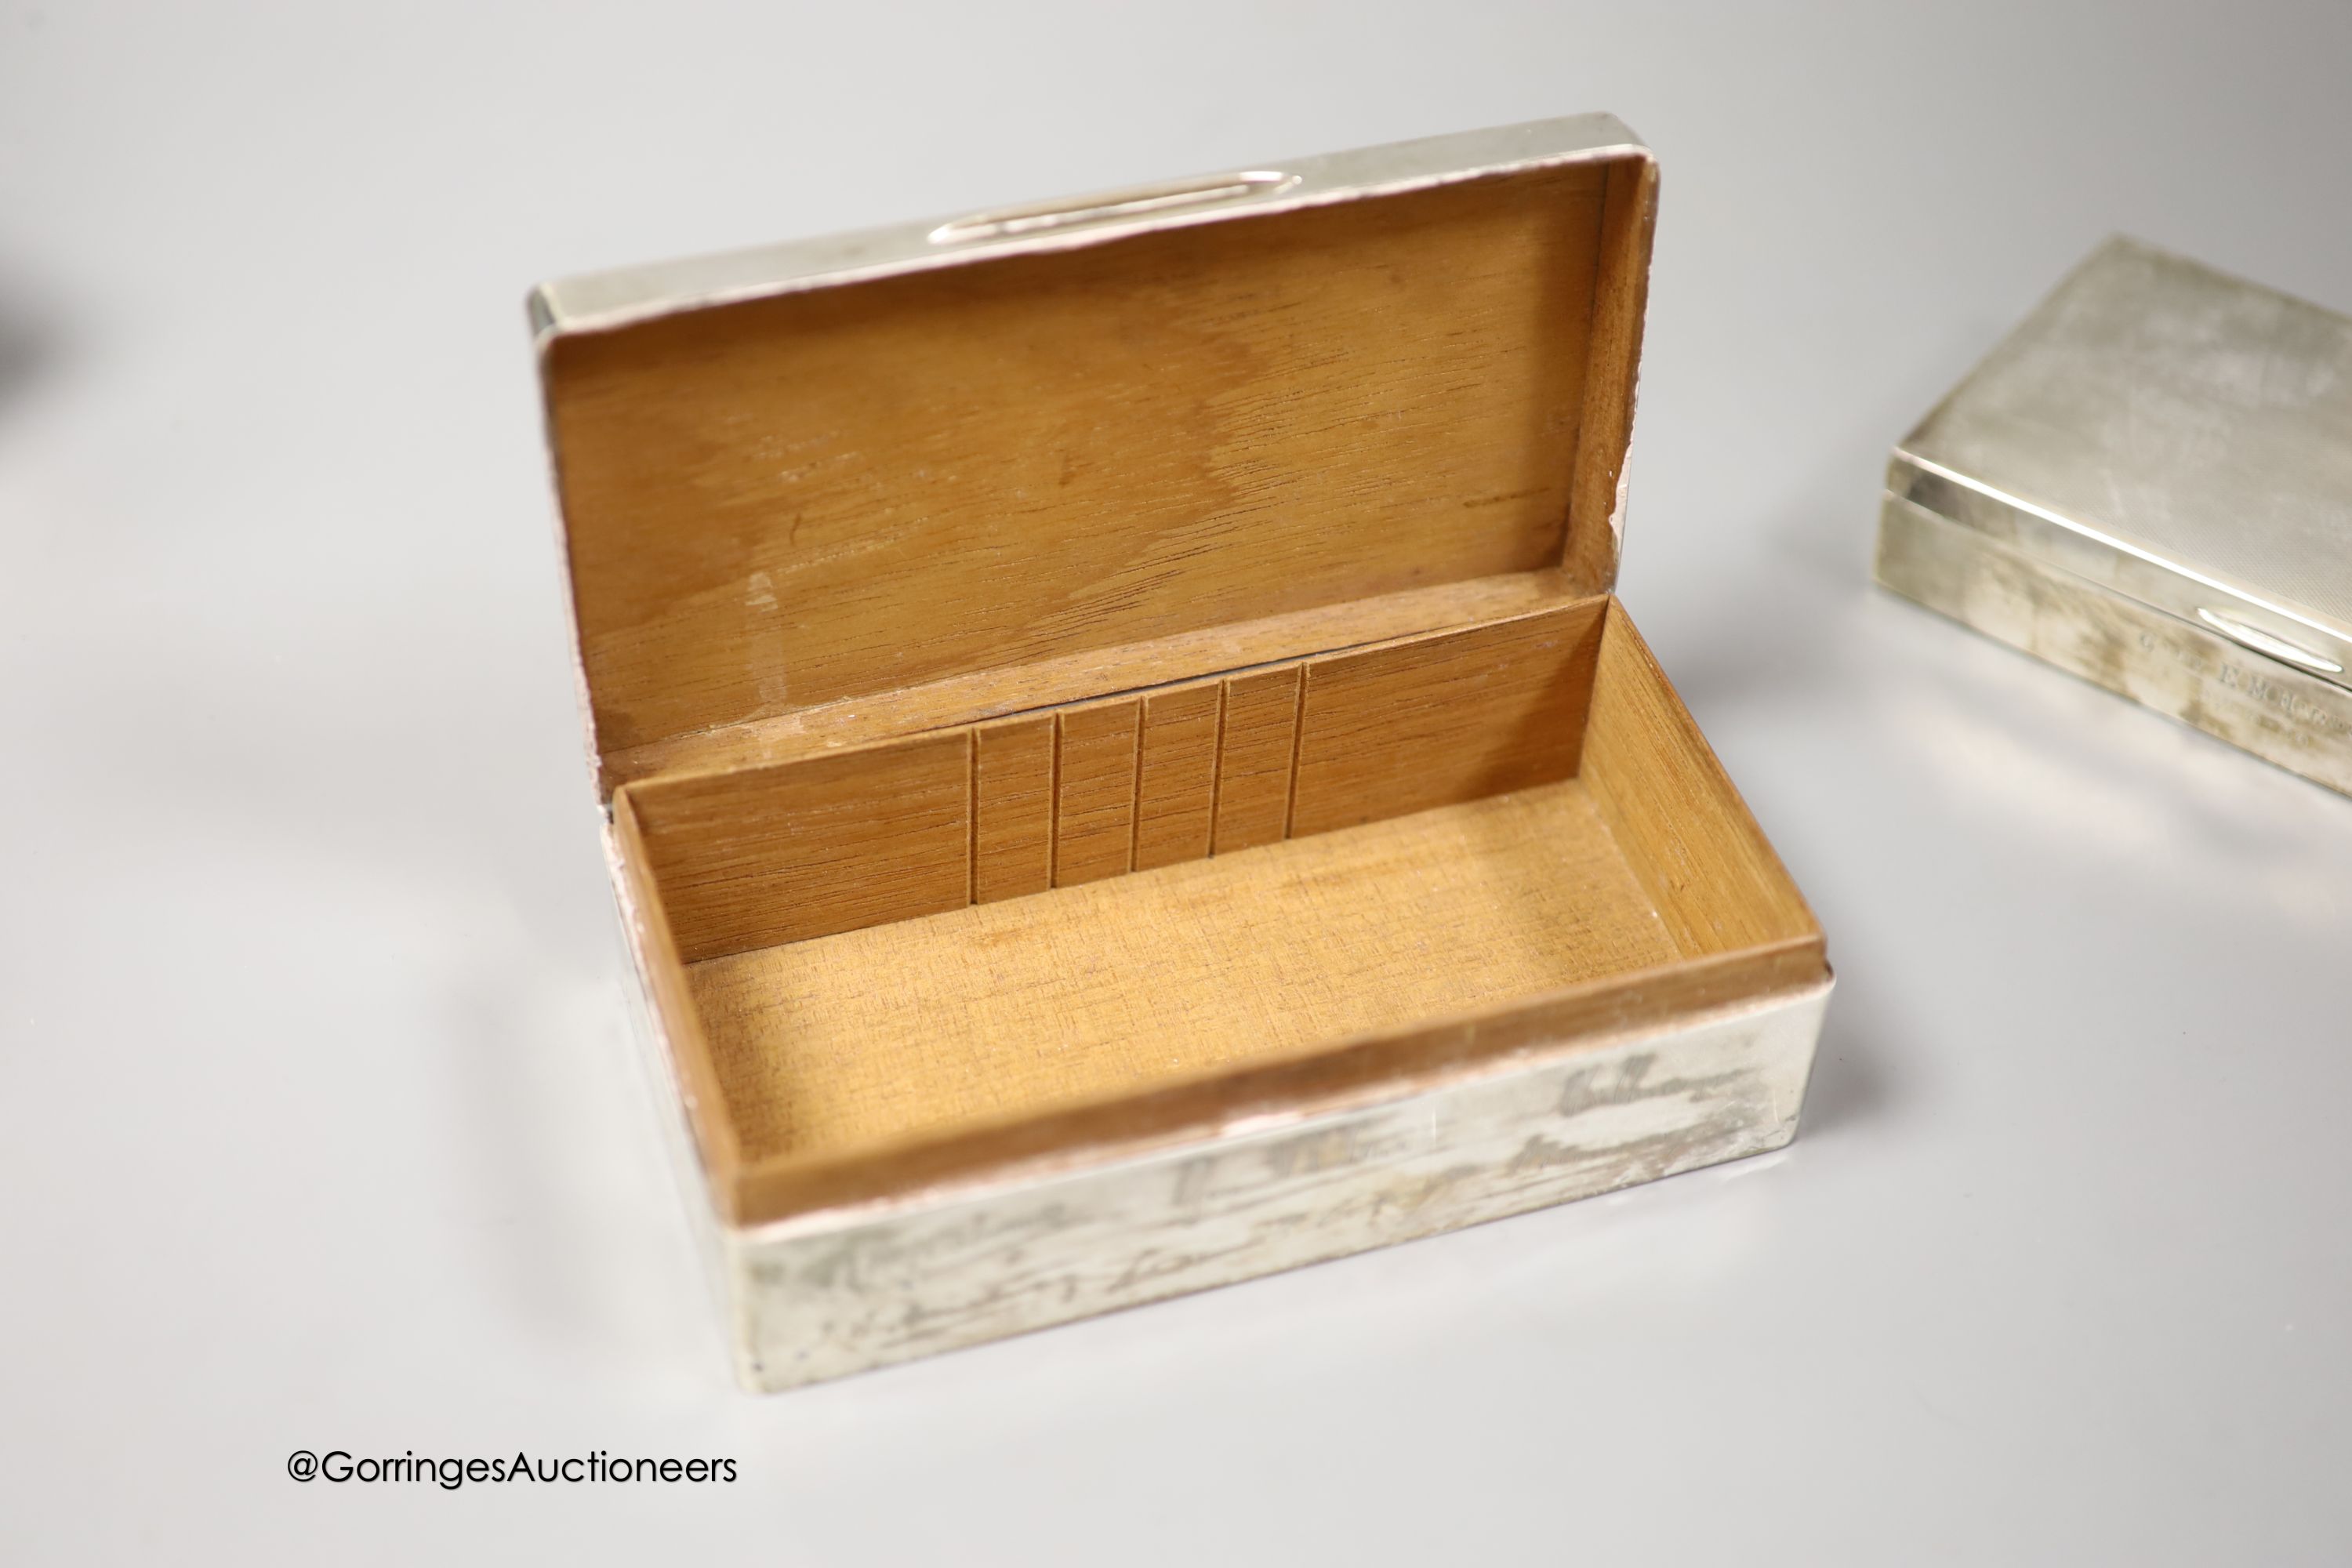 Three 20th century silver mounted cigarette boxes, two with engraved signatures, largest 16.2cm.